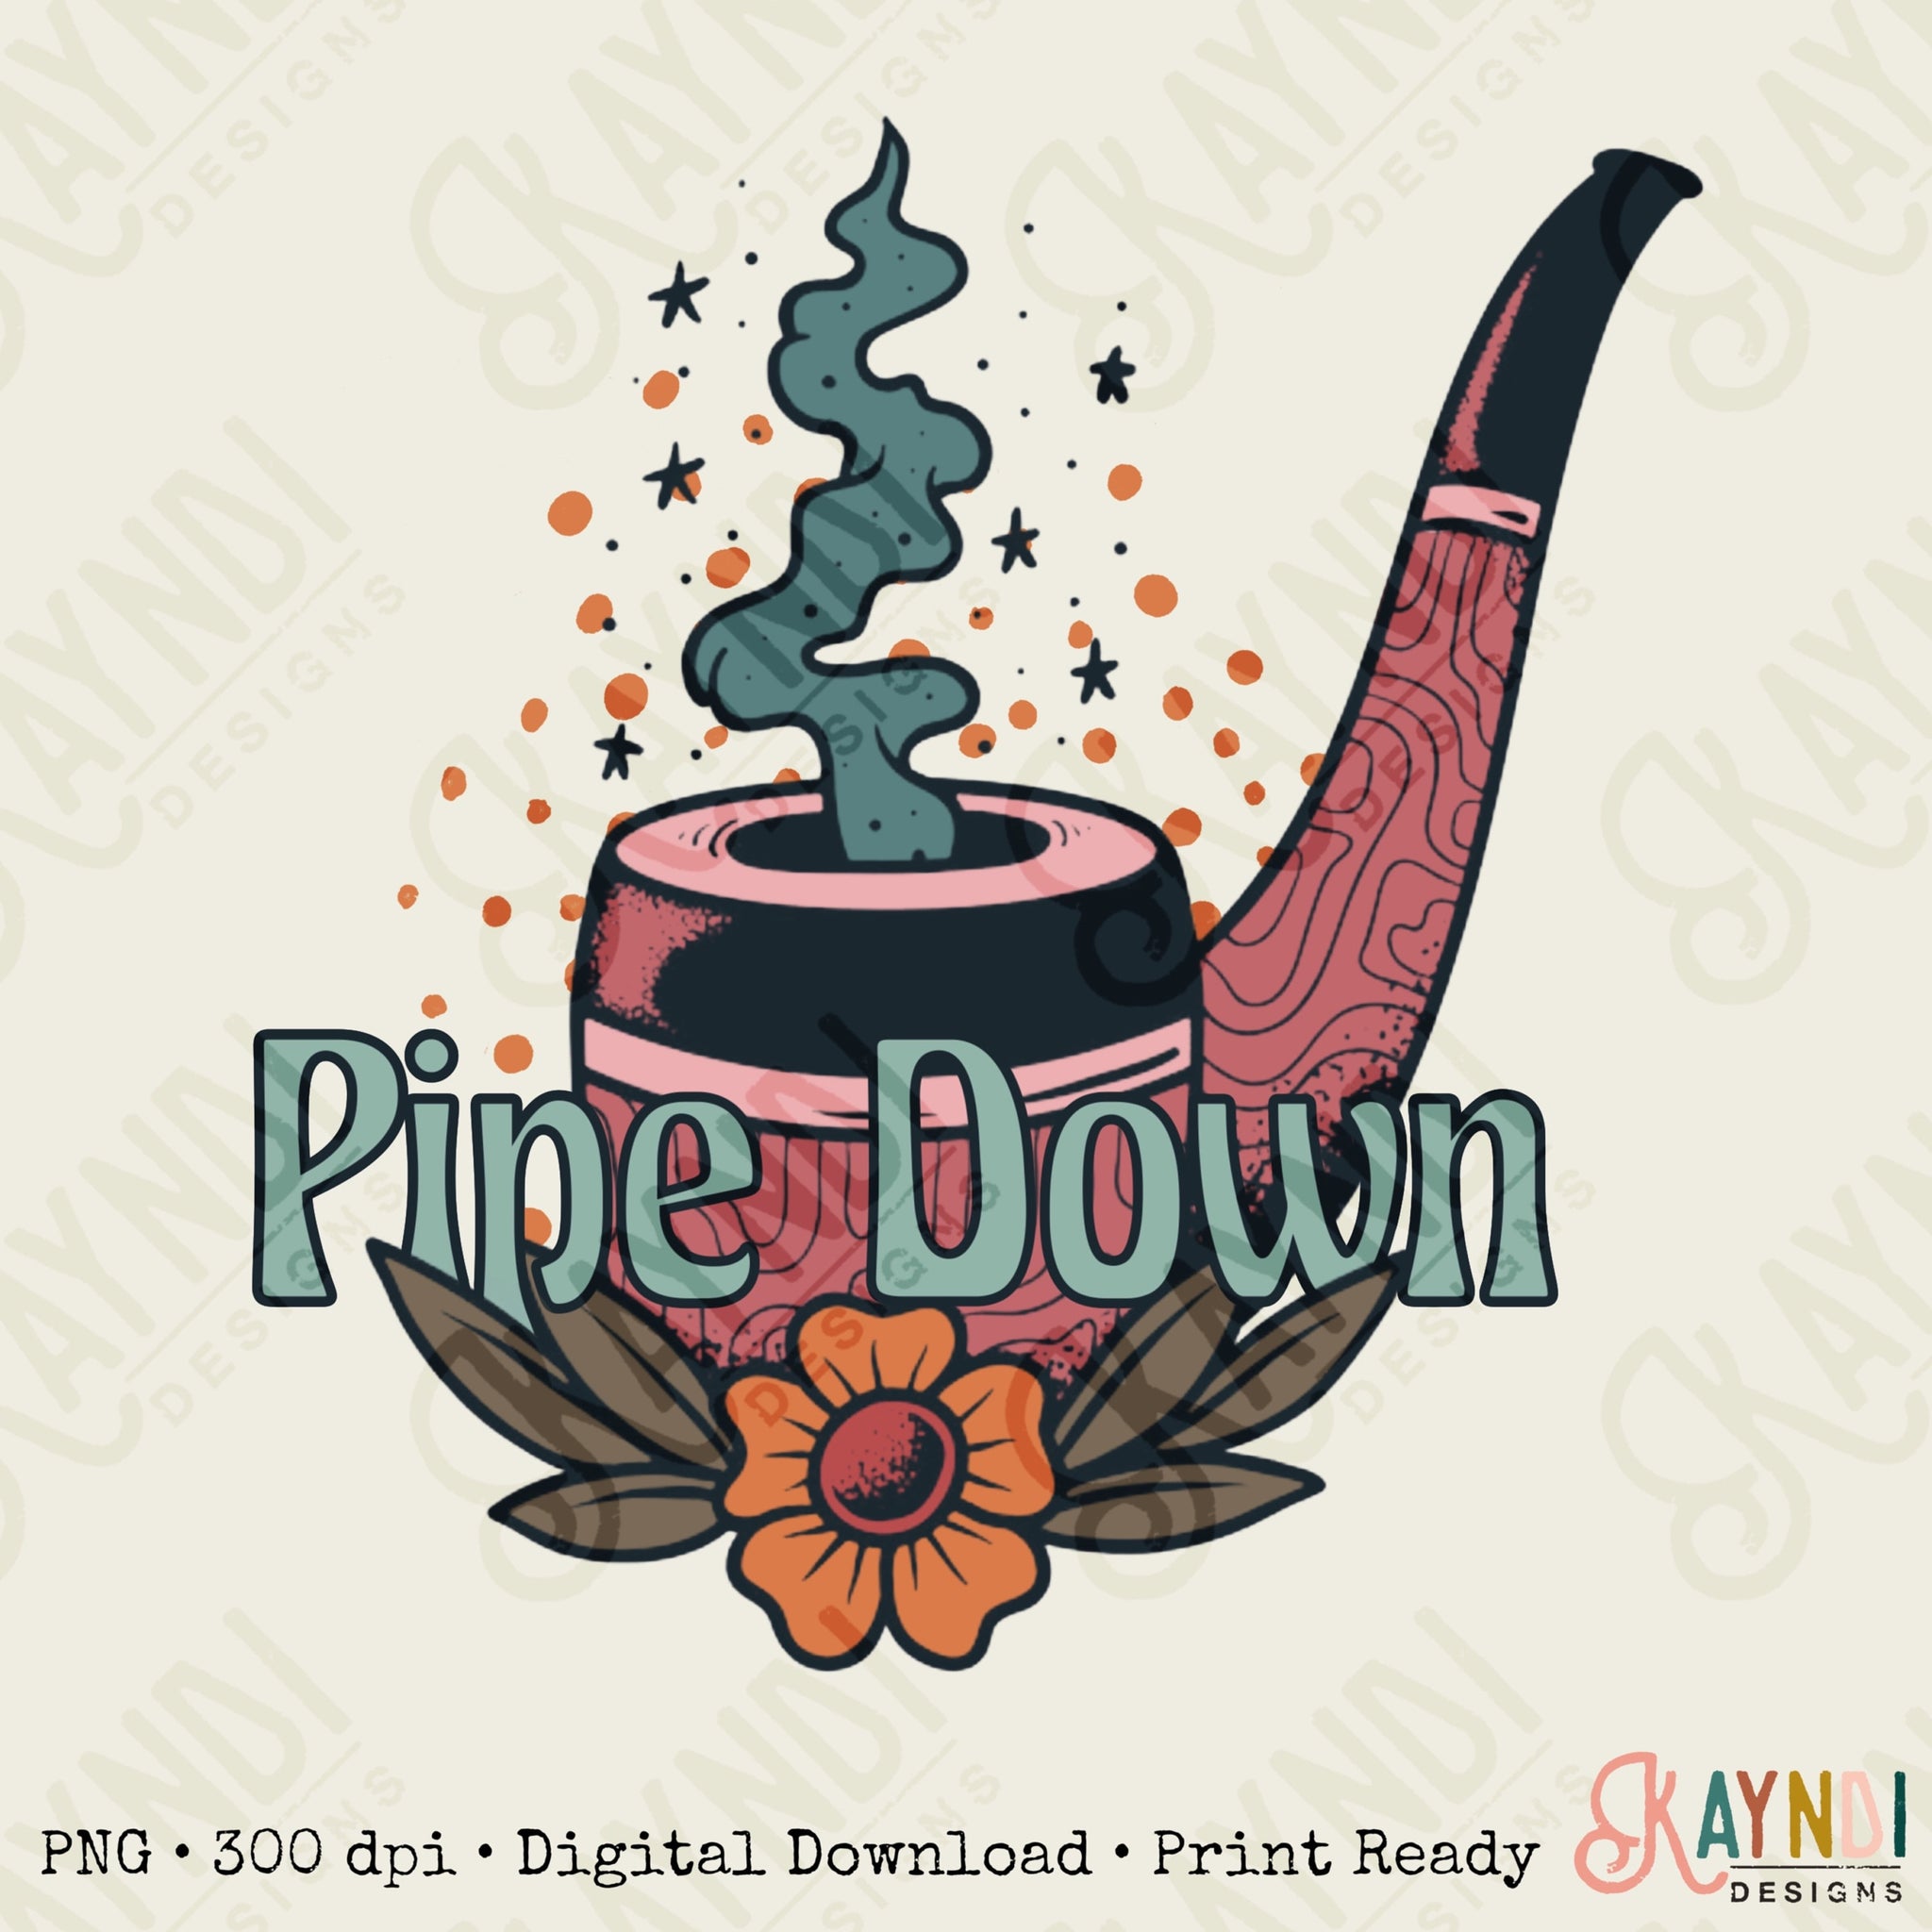 Pipe Down Sublimation Design PNG Digital Download Printable Smoke Pipe Funny Quote Saying Hippie 70s Groovy Retro Flower Boho Hobo